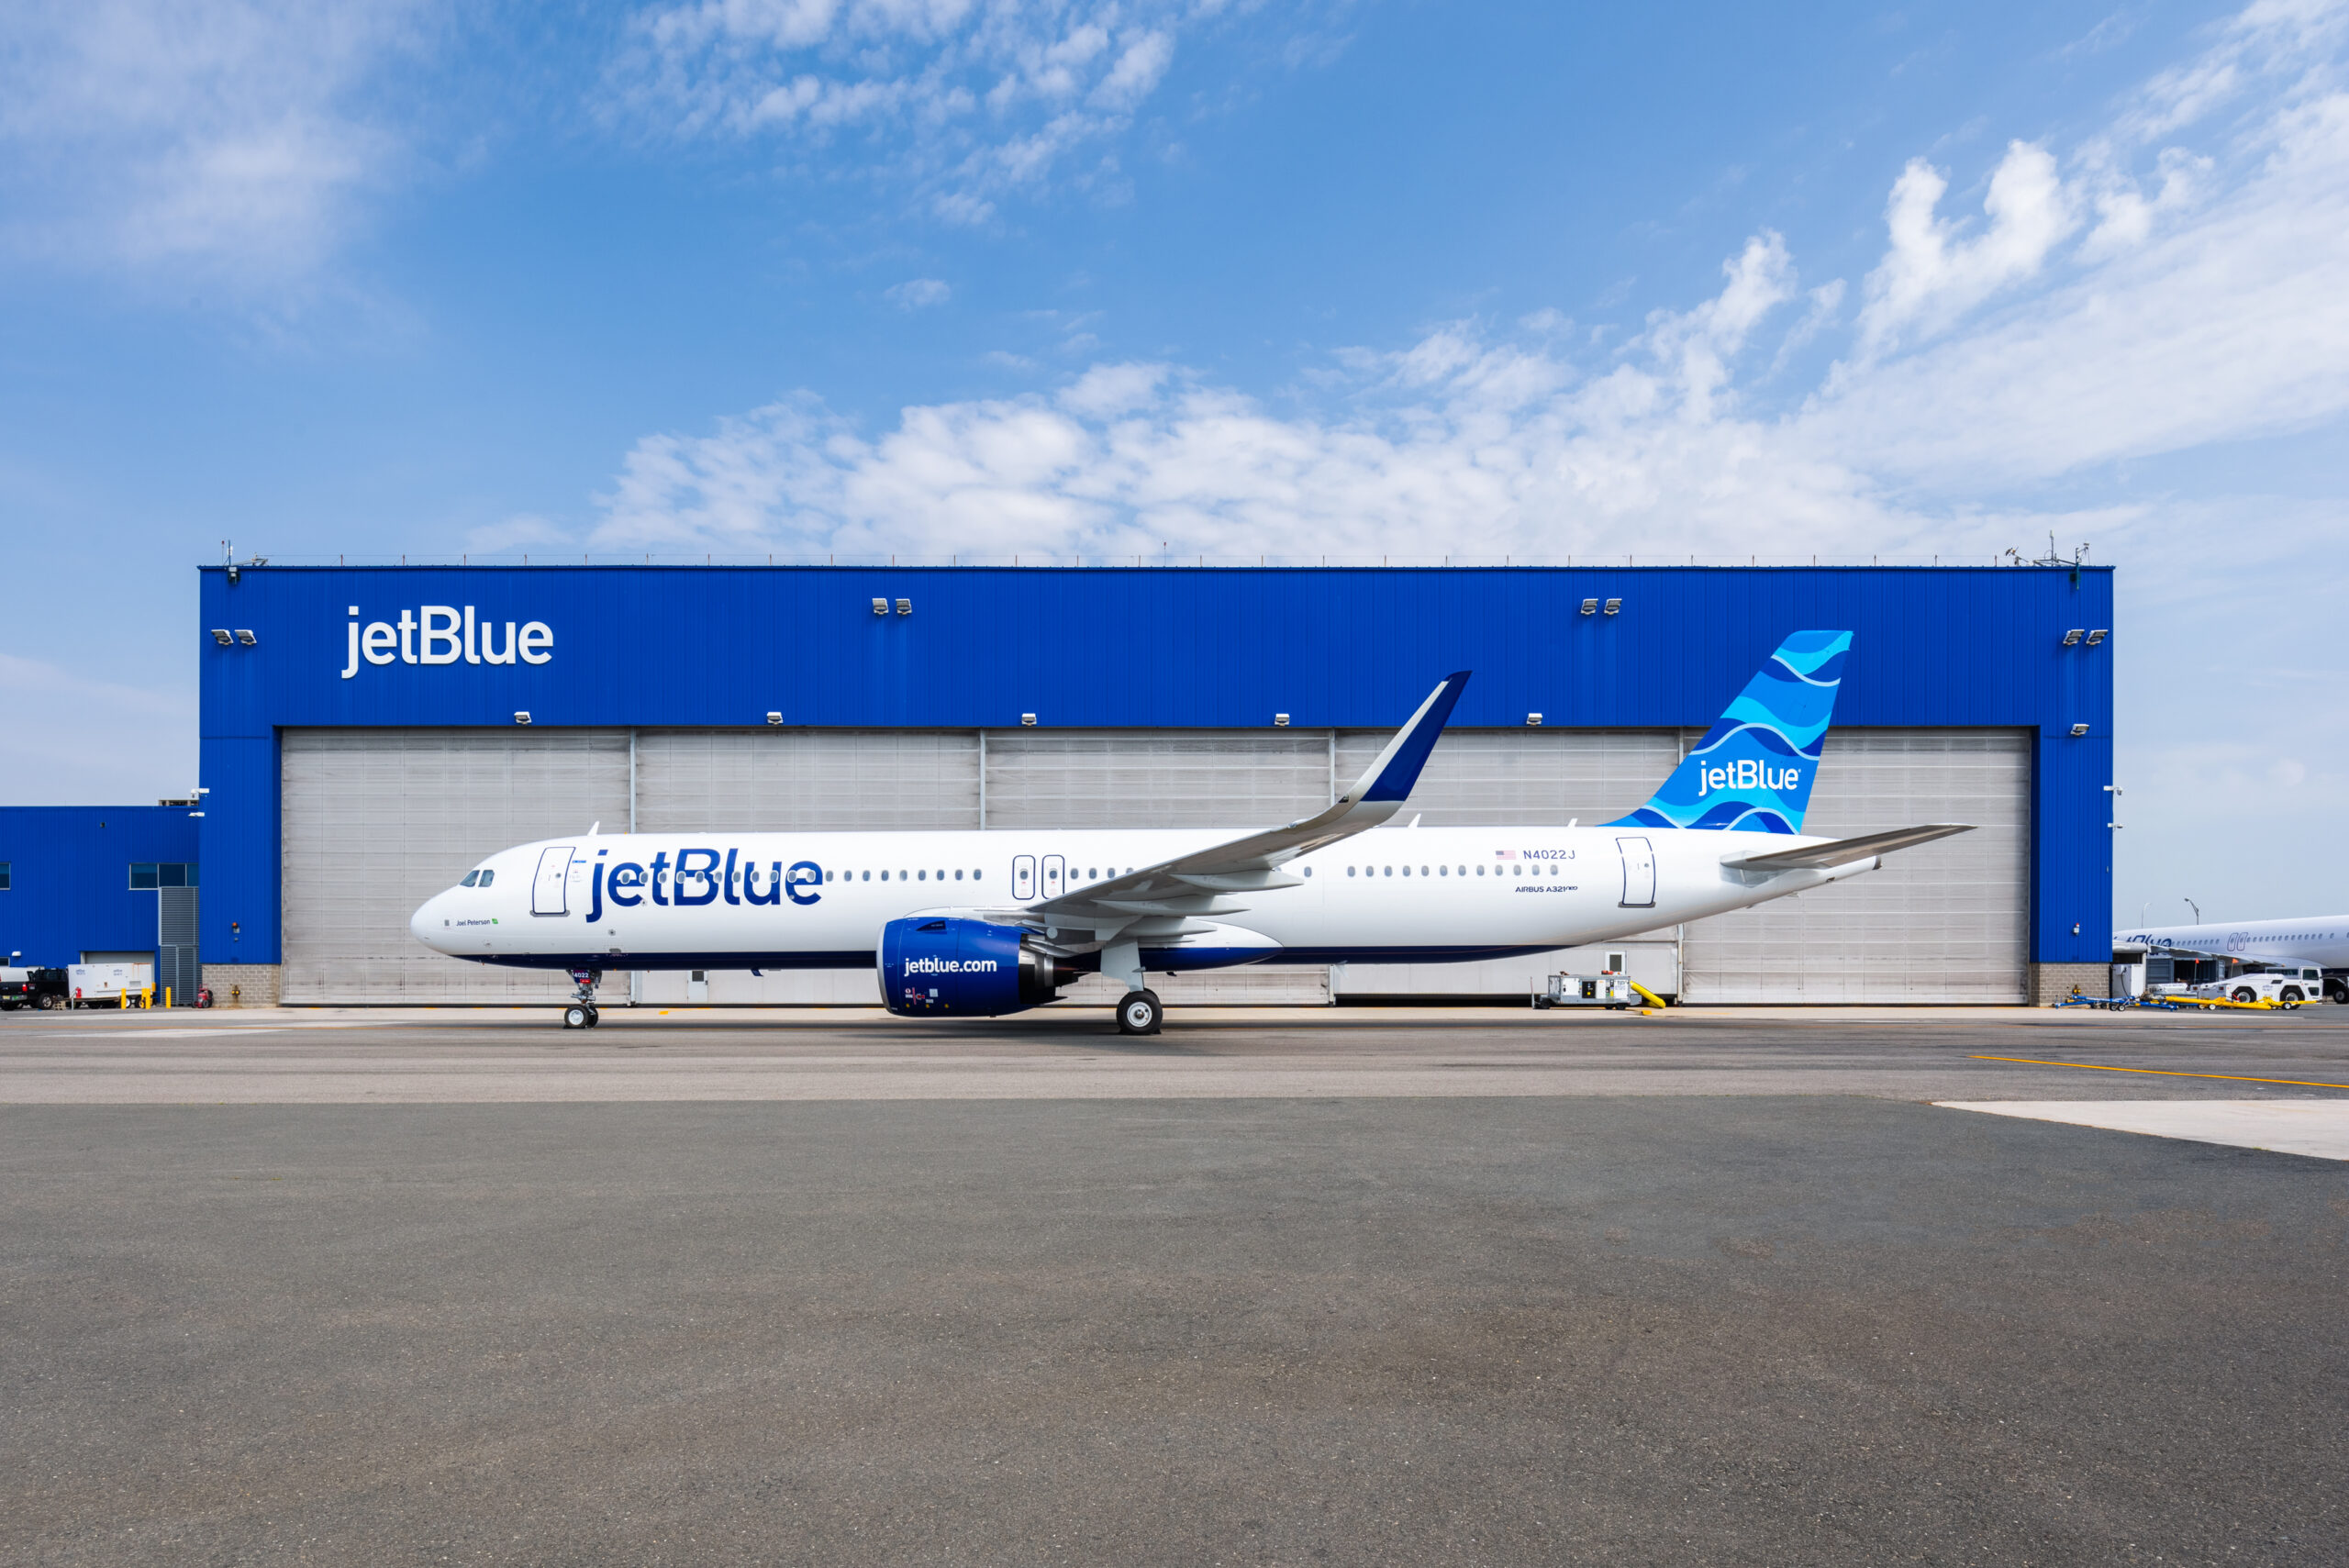 JetBlue to Inaugurate New Flight to Paris This Summer